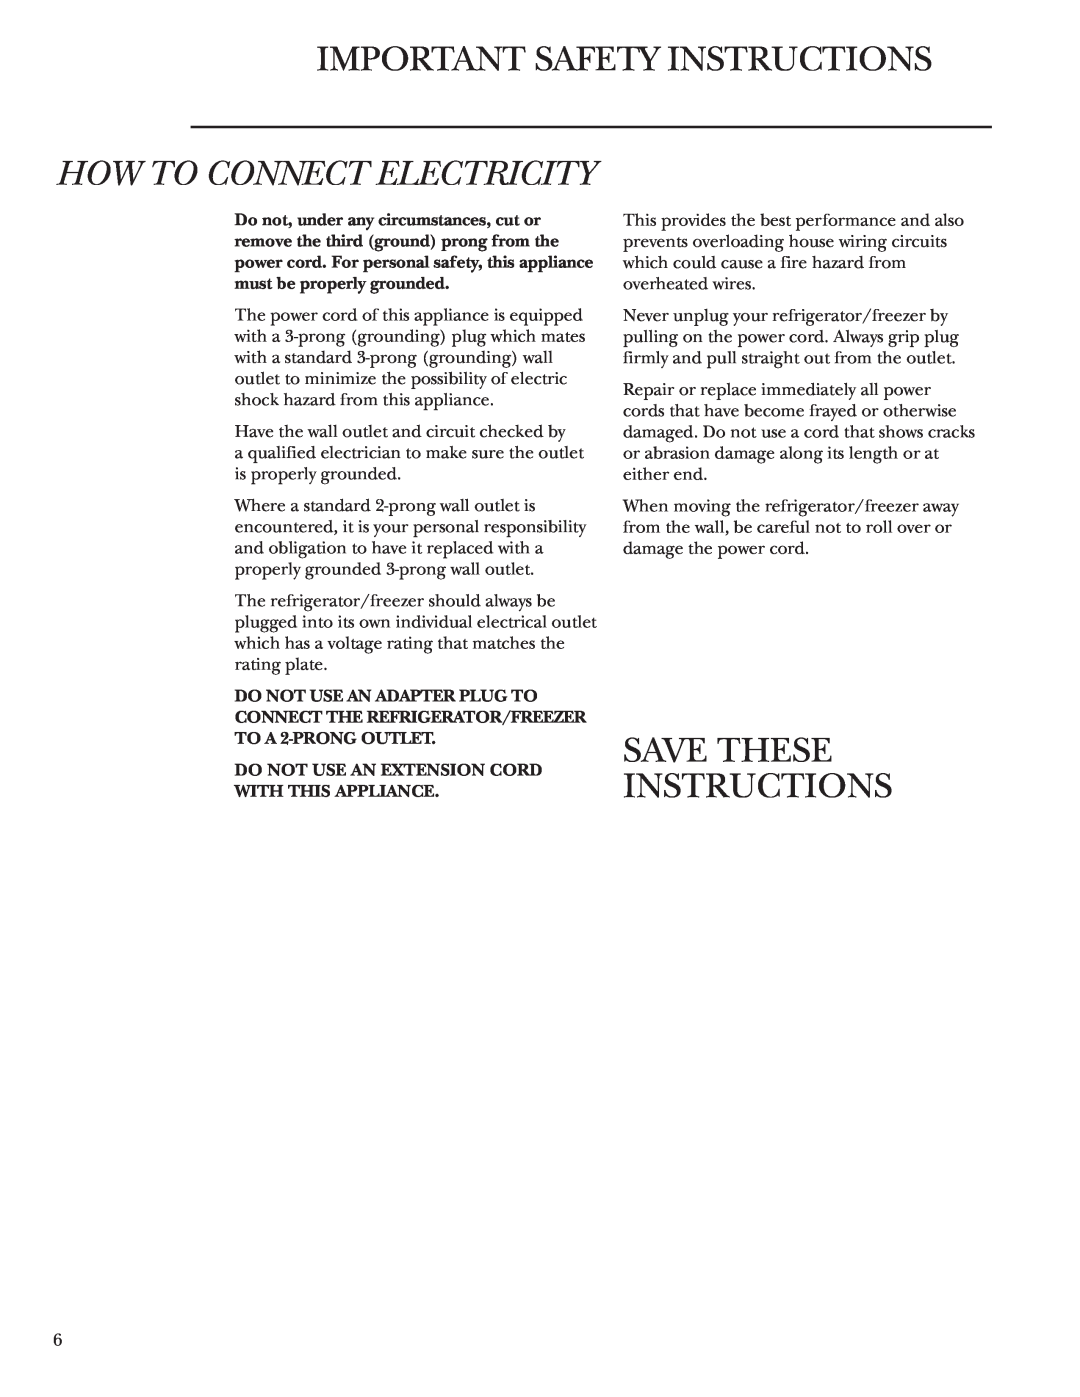 GE Monogram ZIRS36NMRH owner manual How To Connect Electricity, Save These Instructions, Important Safety Instructions 